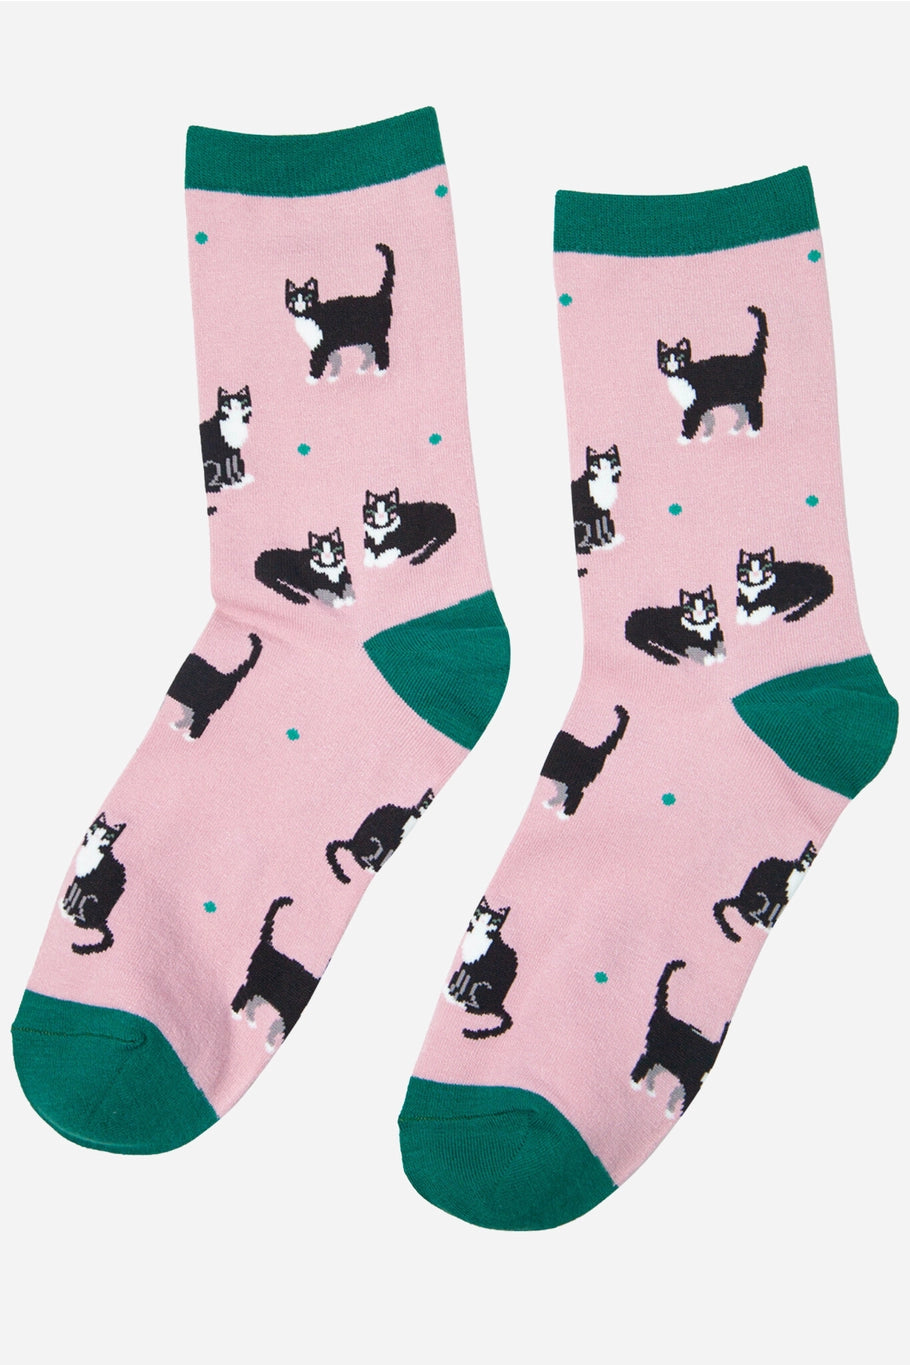 Women's Pink Bamboo Socks with Black Cats